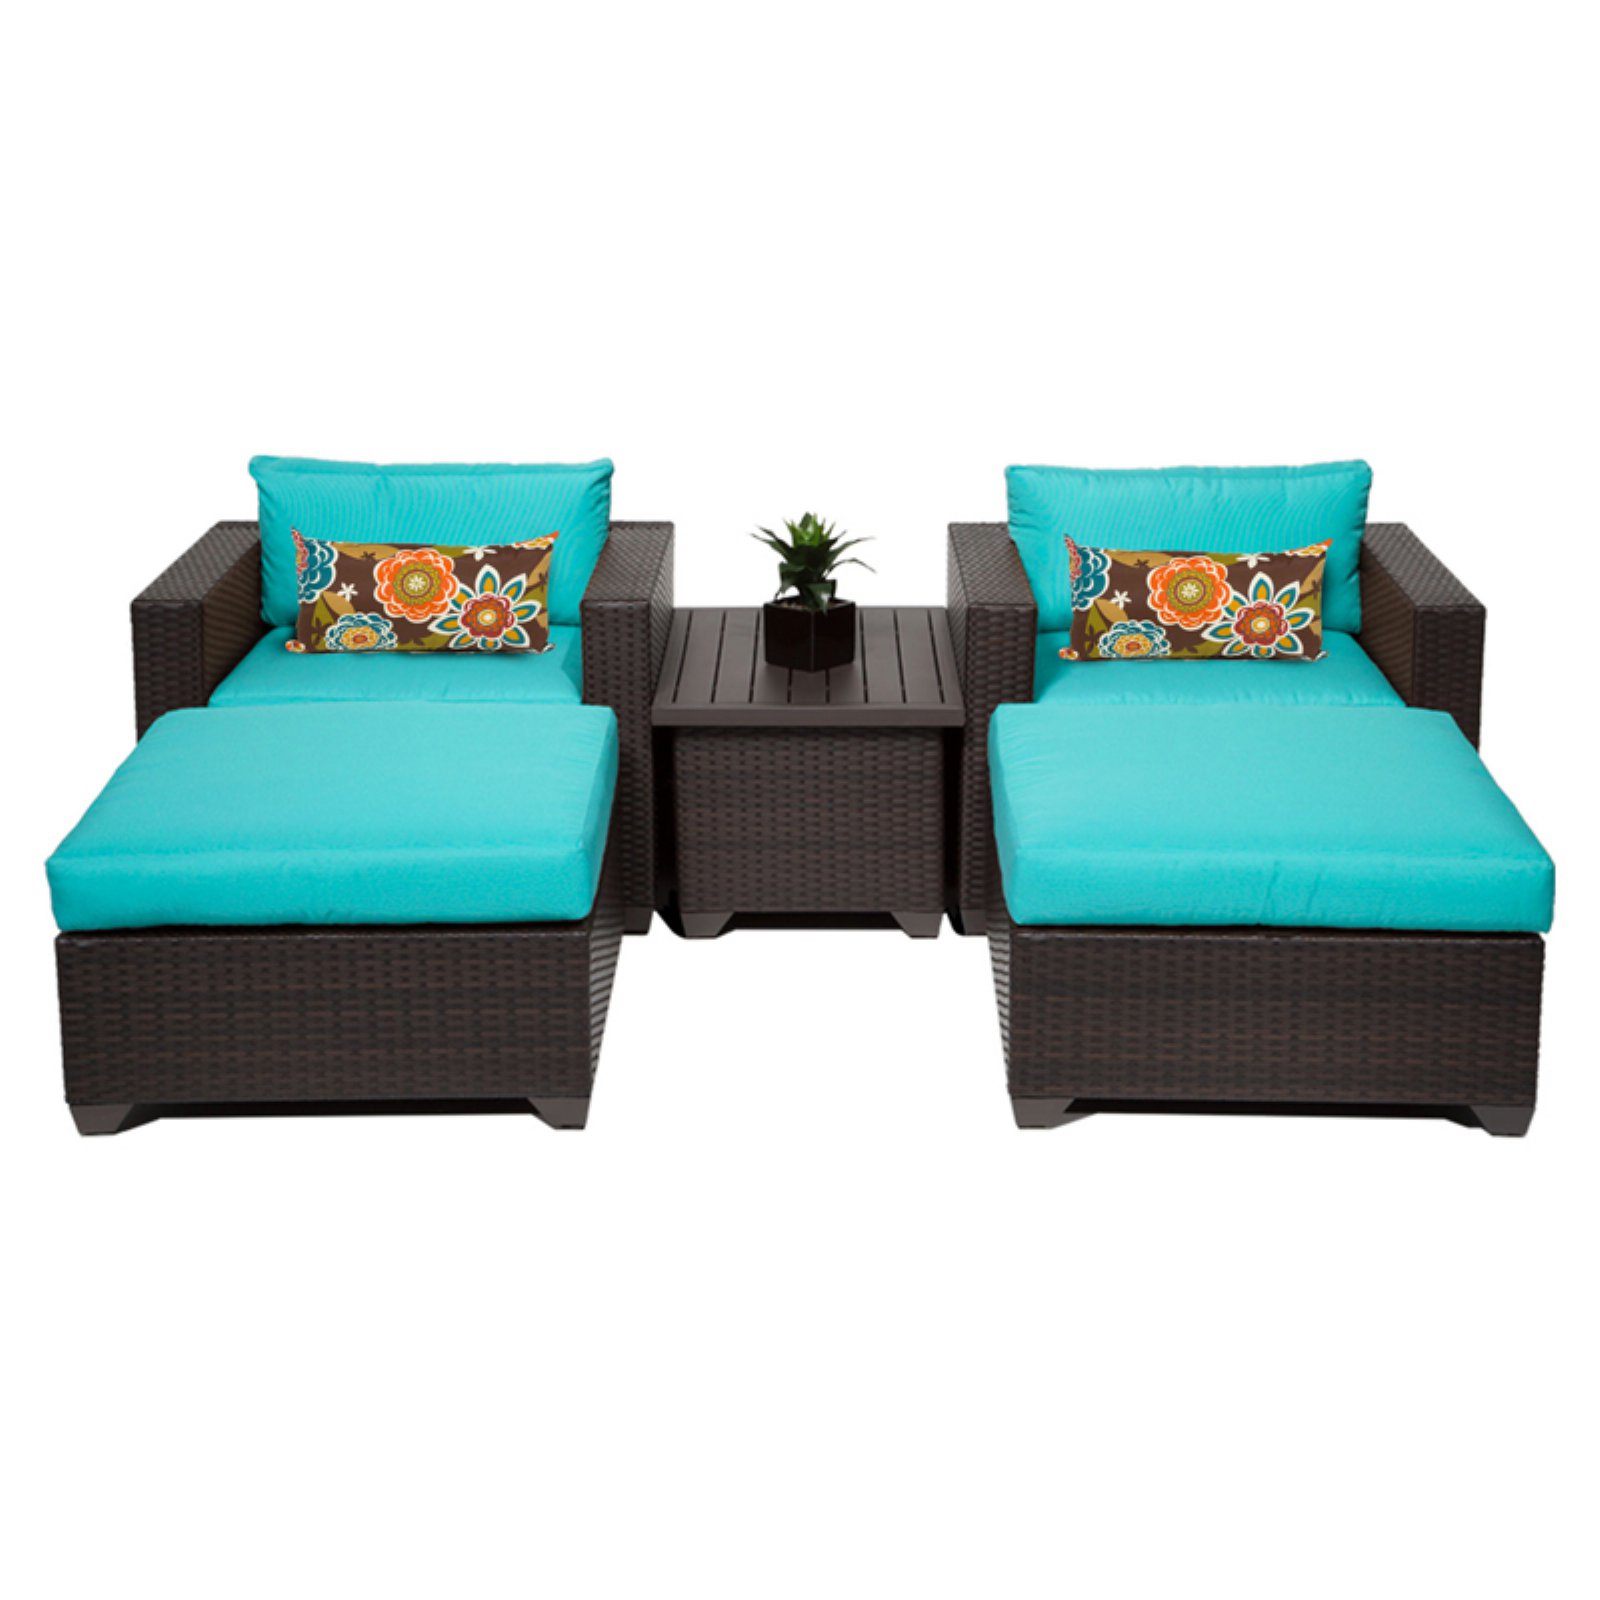 BELLE-05a-TANGERINE Belle 5 Piece Outdoor Wicker Patio Furniture Set 05a with 2 Covers: Wheat and Tangerine - image 2 of 2